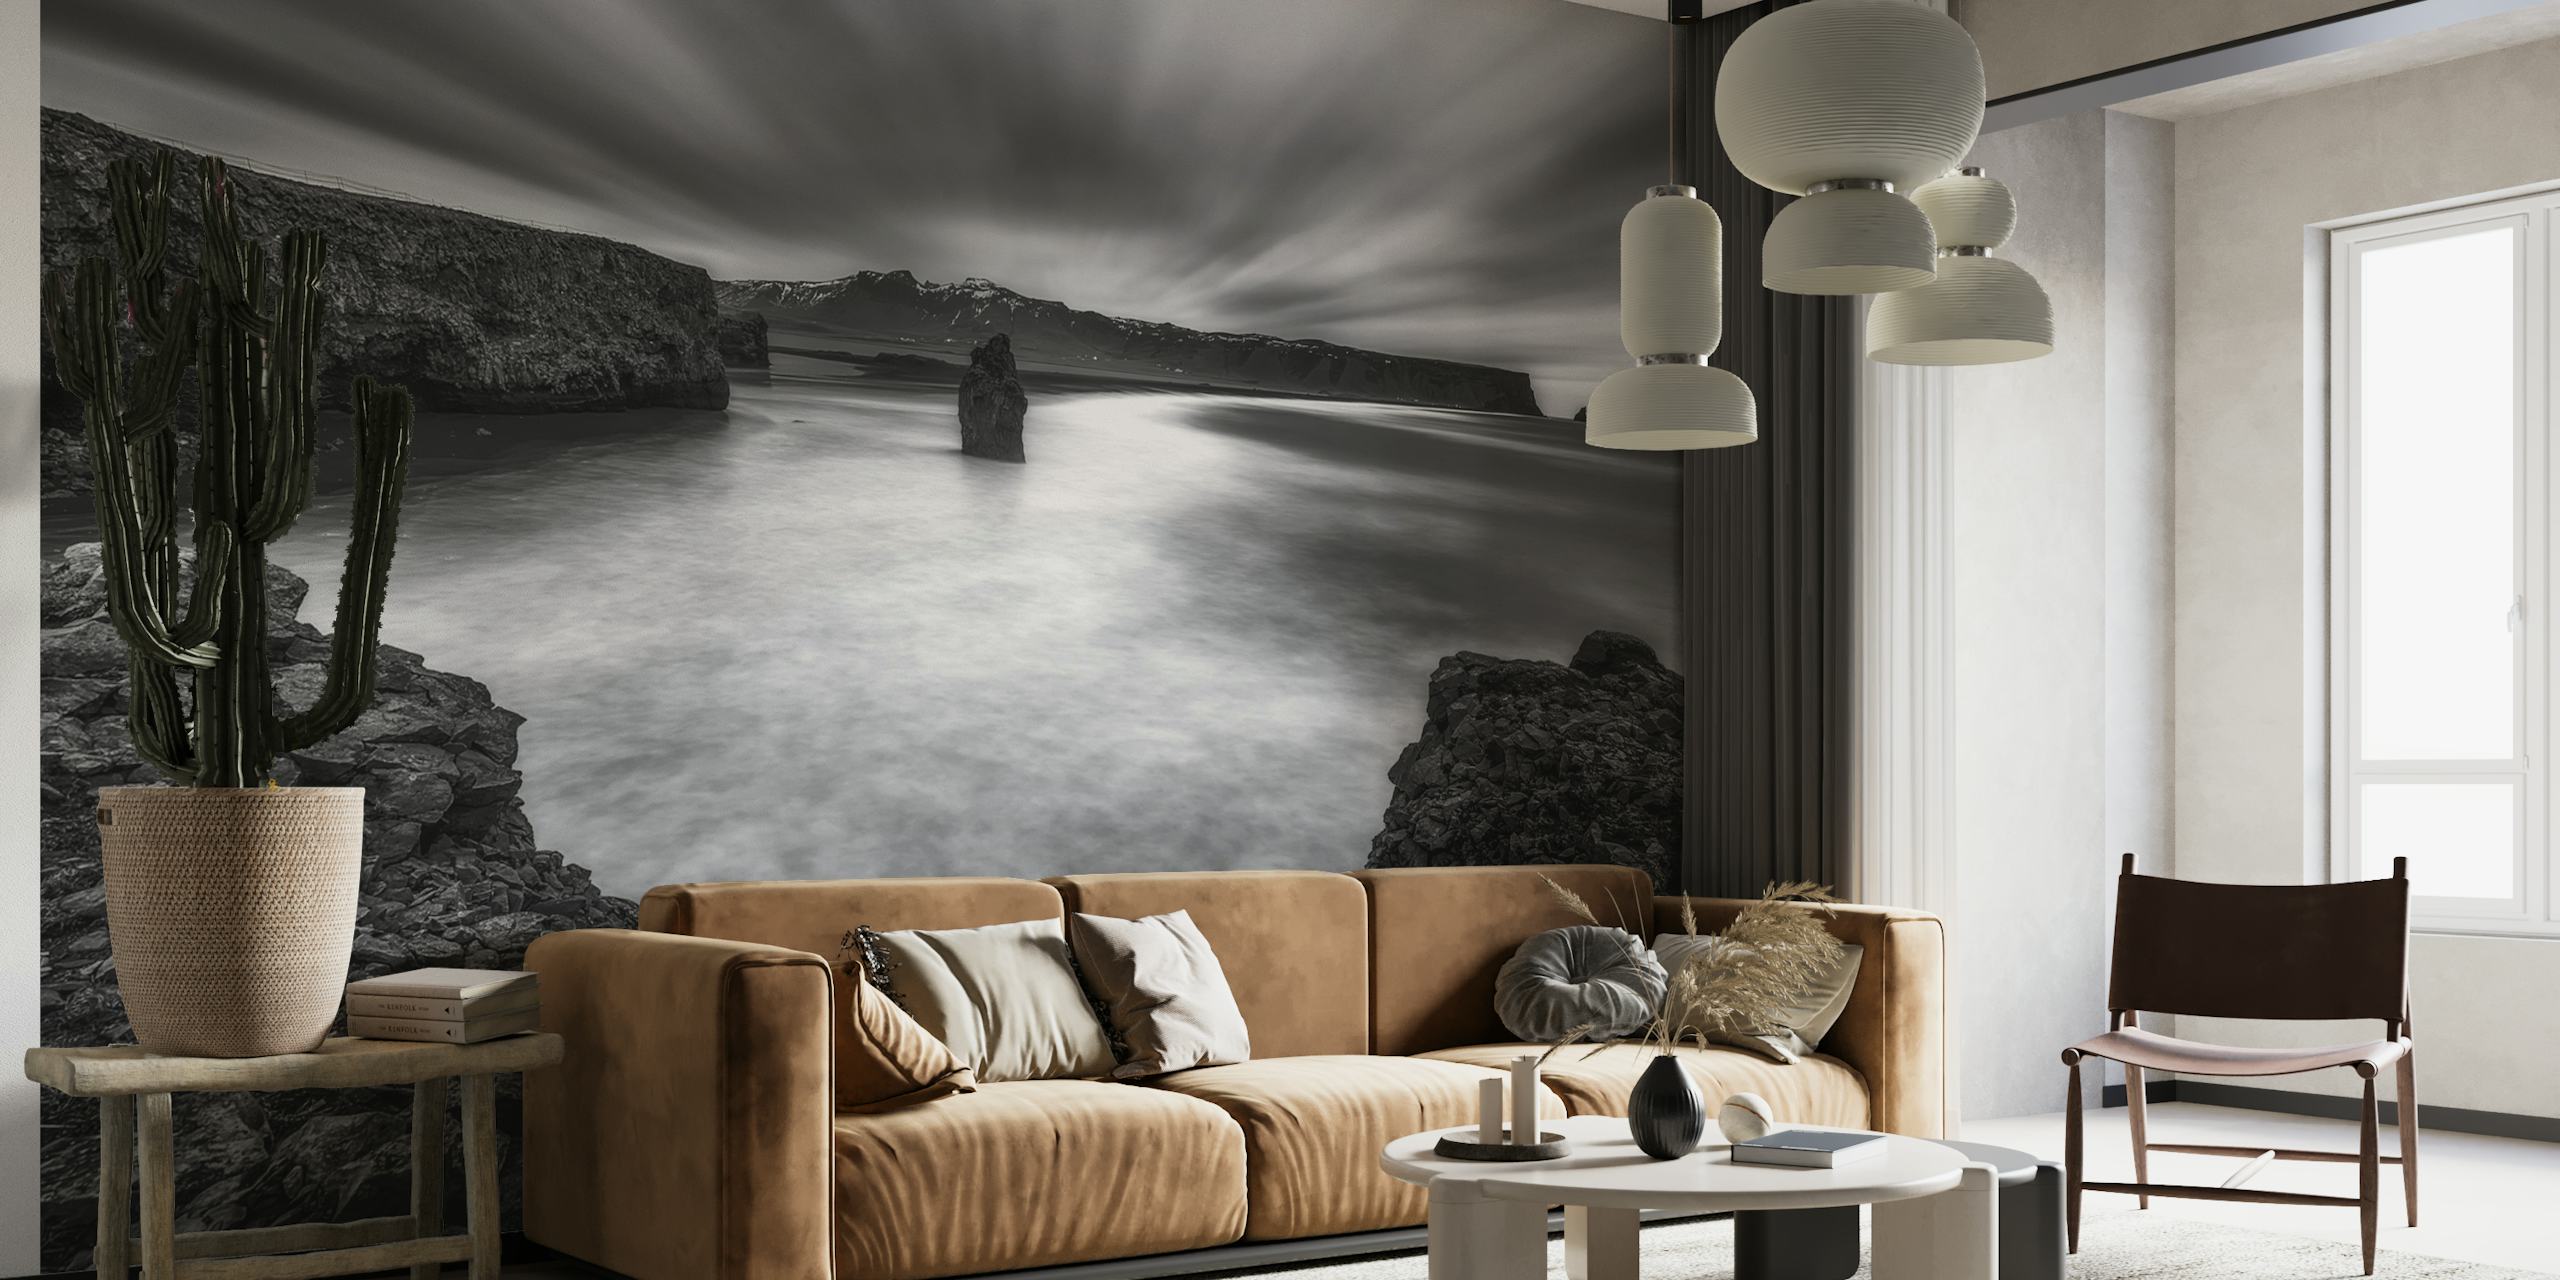 Black and white wall mural depicting dynamic clouds and a tranquil body of water with cliffside